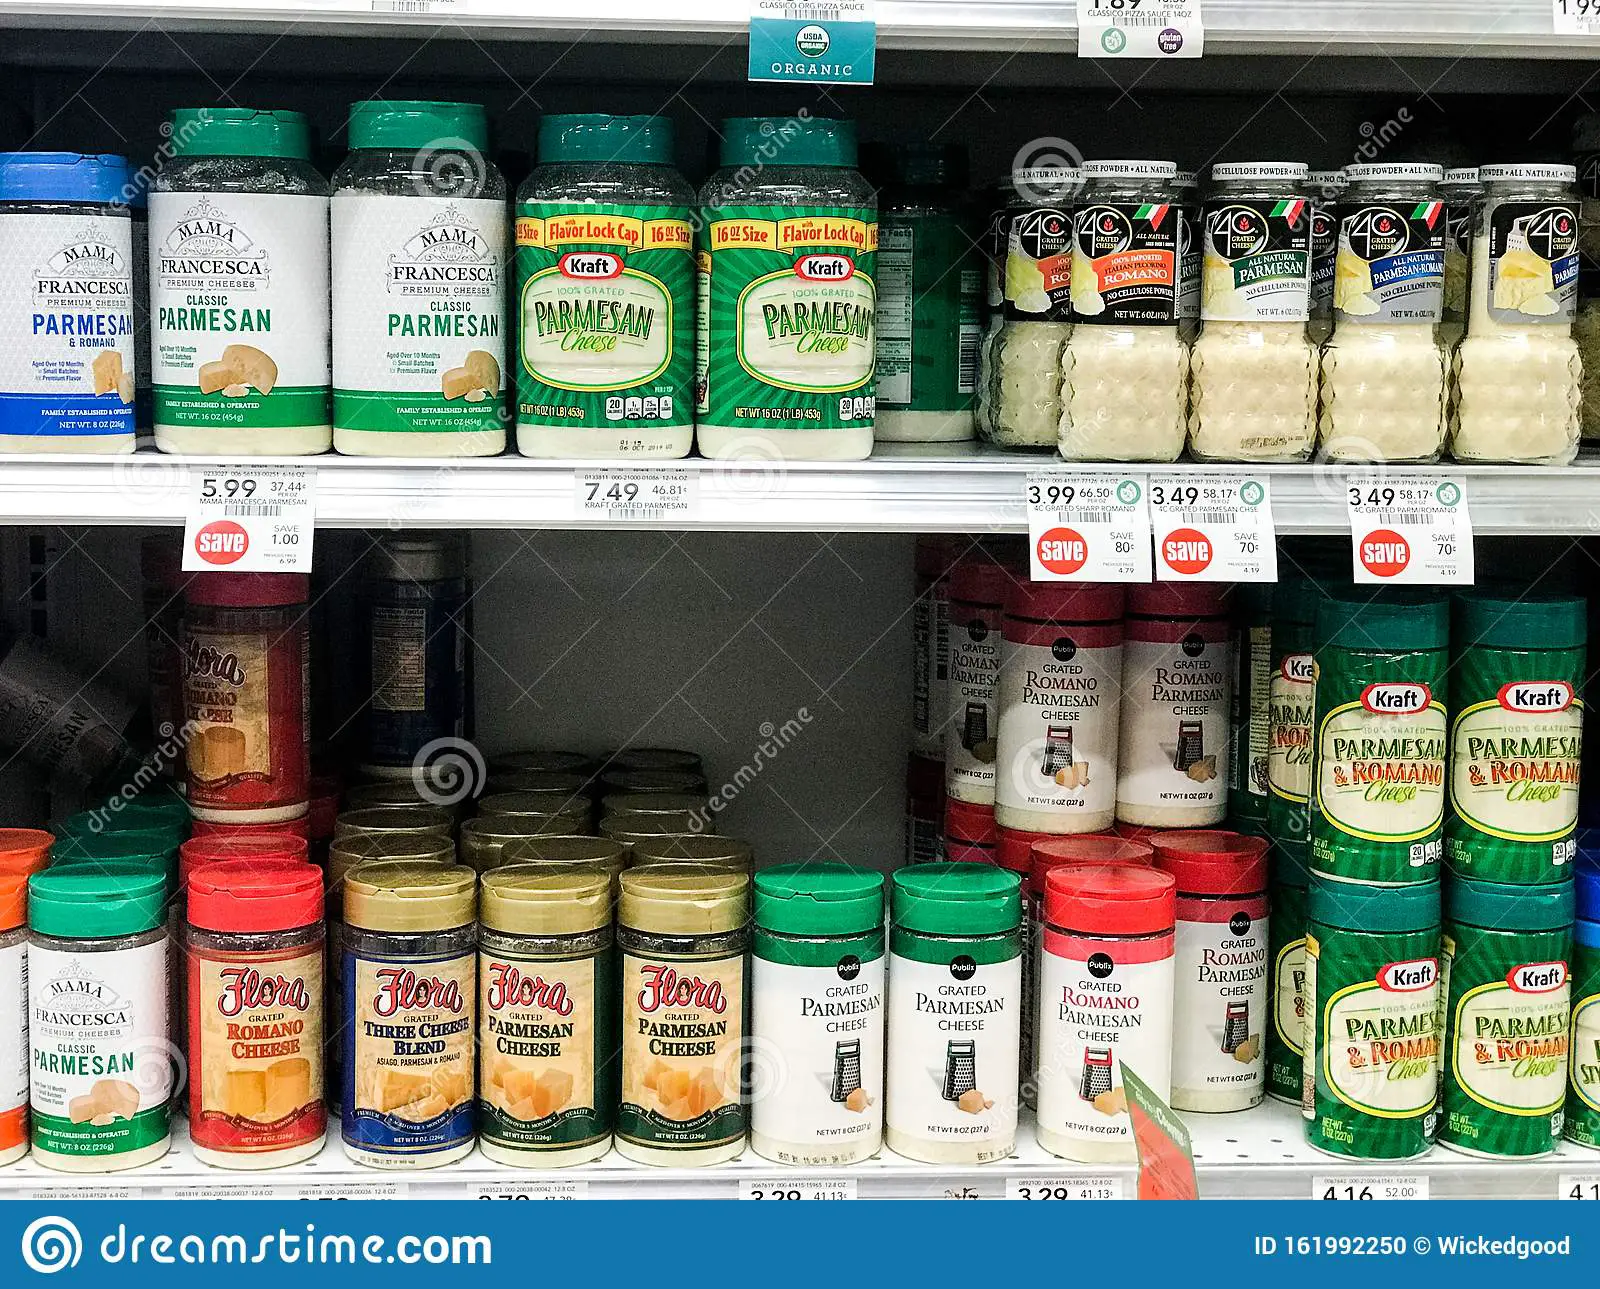 Multiple Brands Of Parmesan Cheese For Sale At A Grocery ...